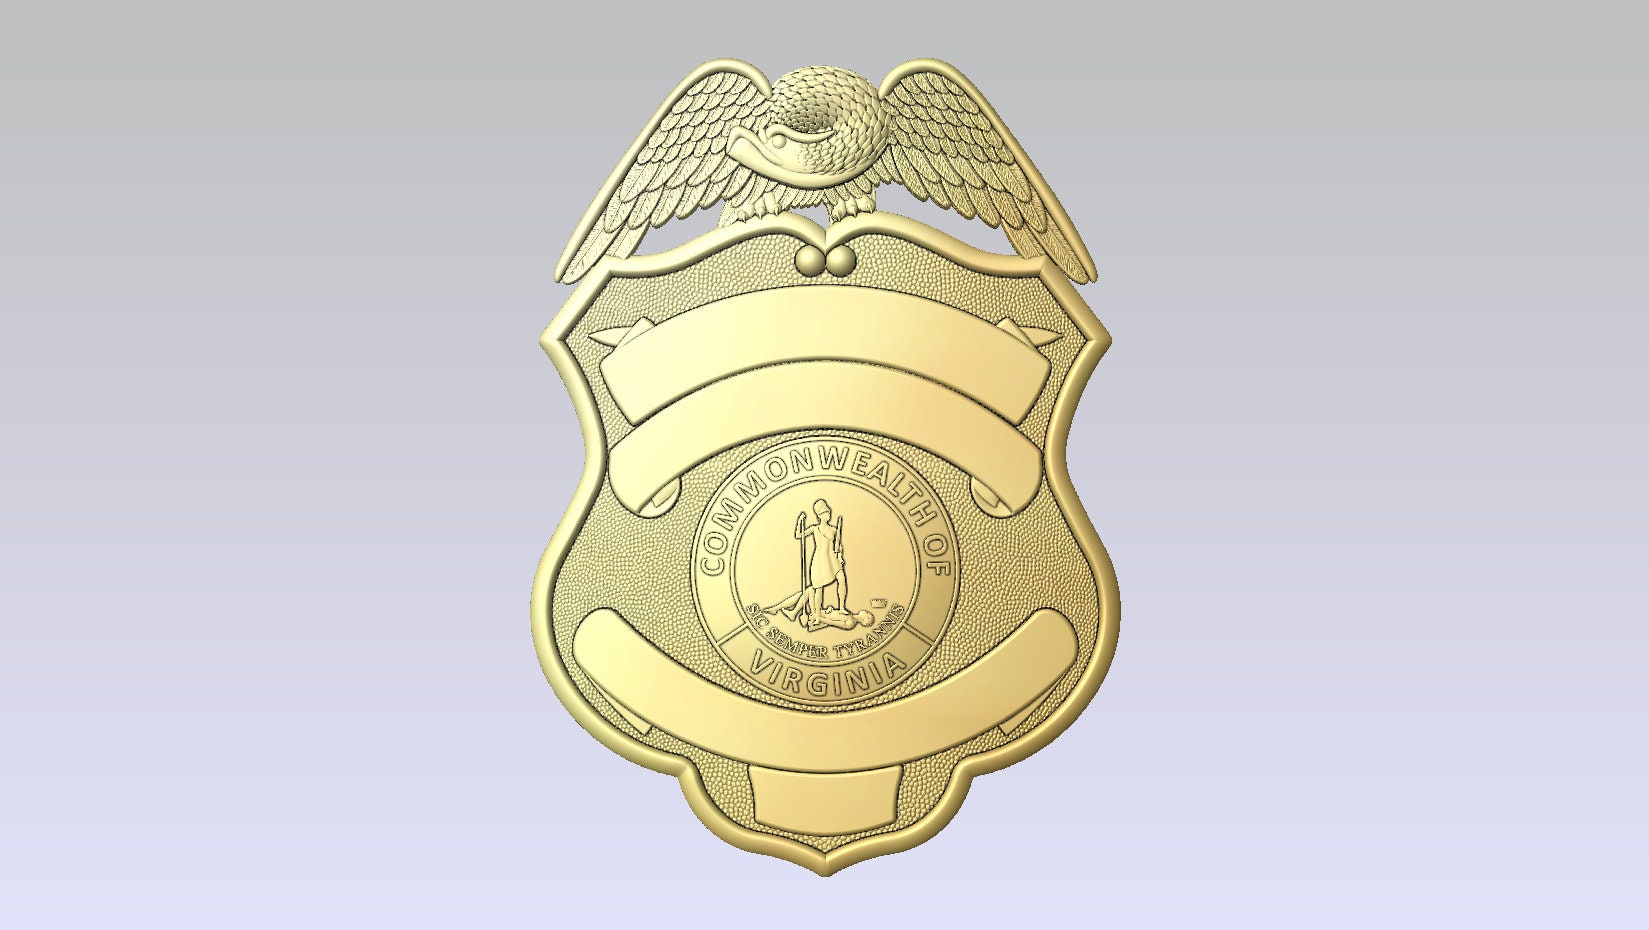 Police Badge With Chain In 3d Vector Stock Illustration - Download